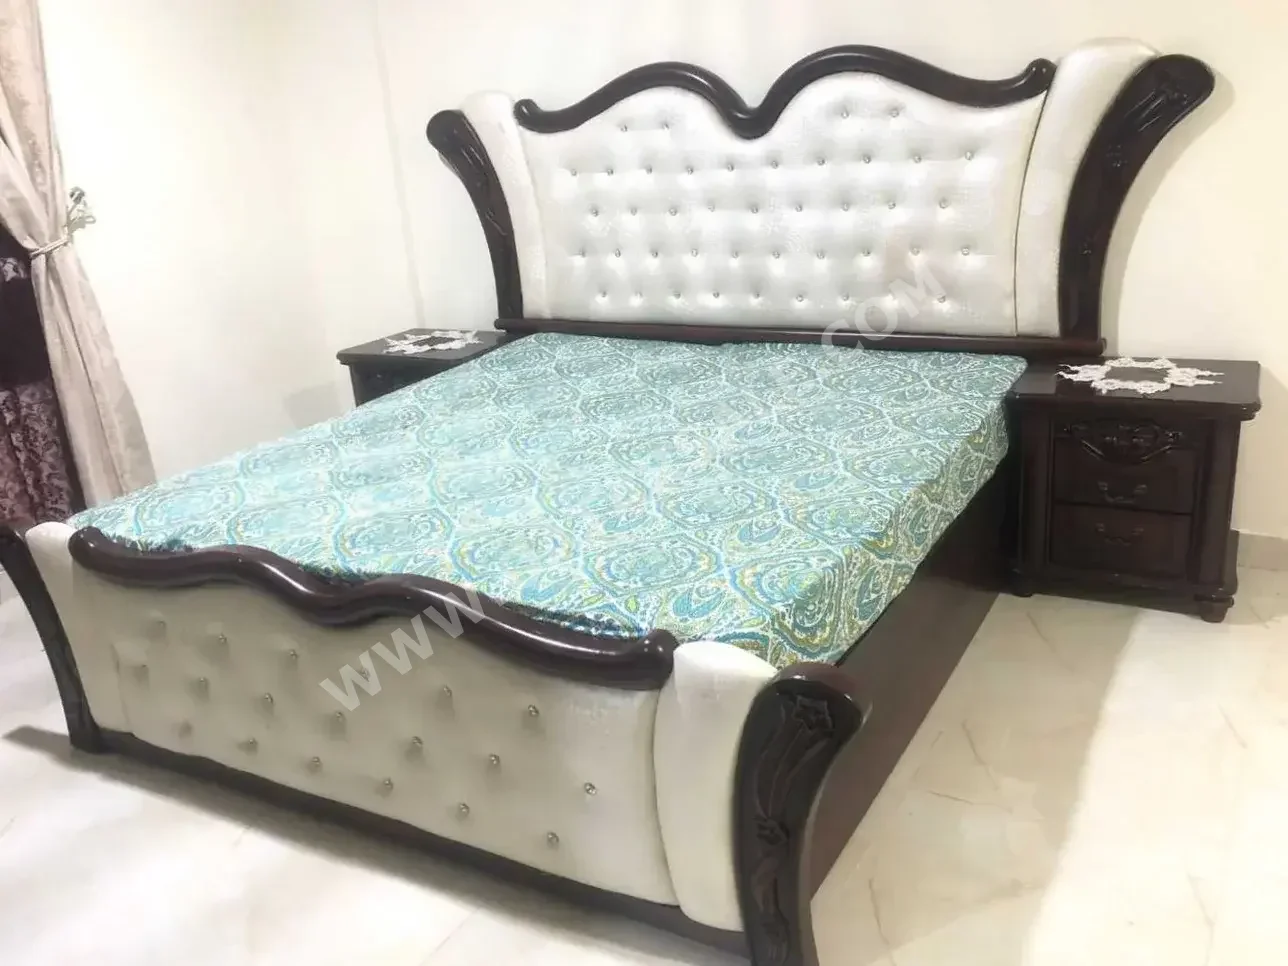 Beds King  Brown  Mattress Included  With Bedside Table